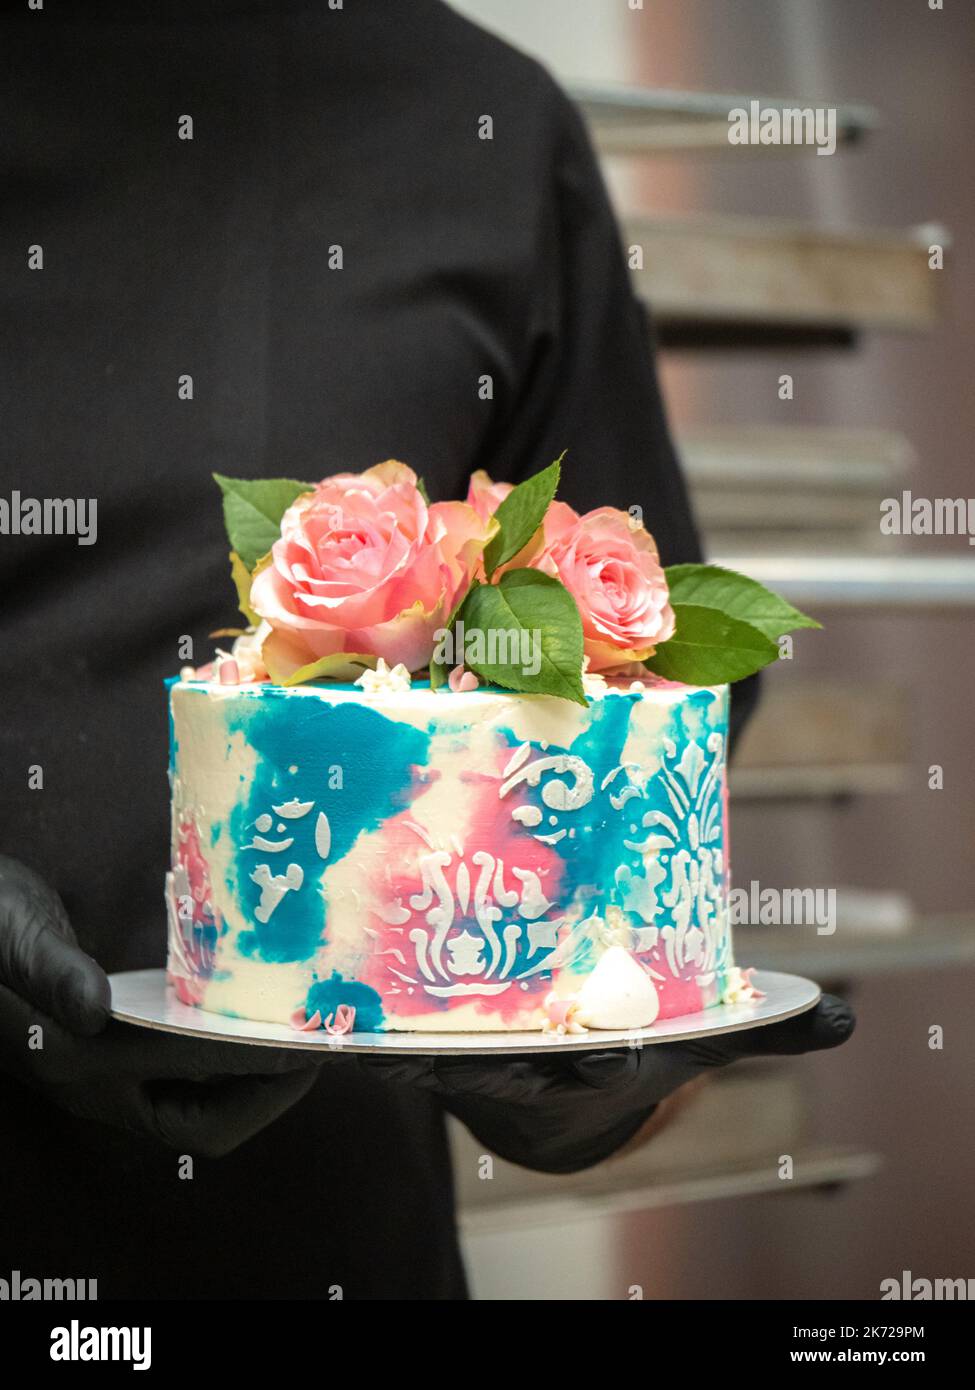 birthday pastel frosted cup cake with topping natural real roses and turquoise deco Stock Photo